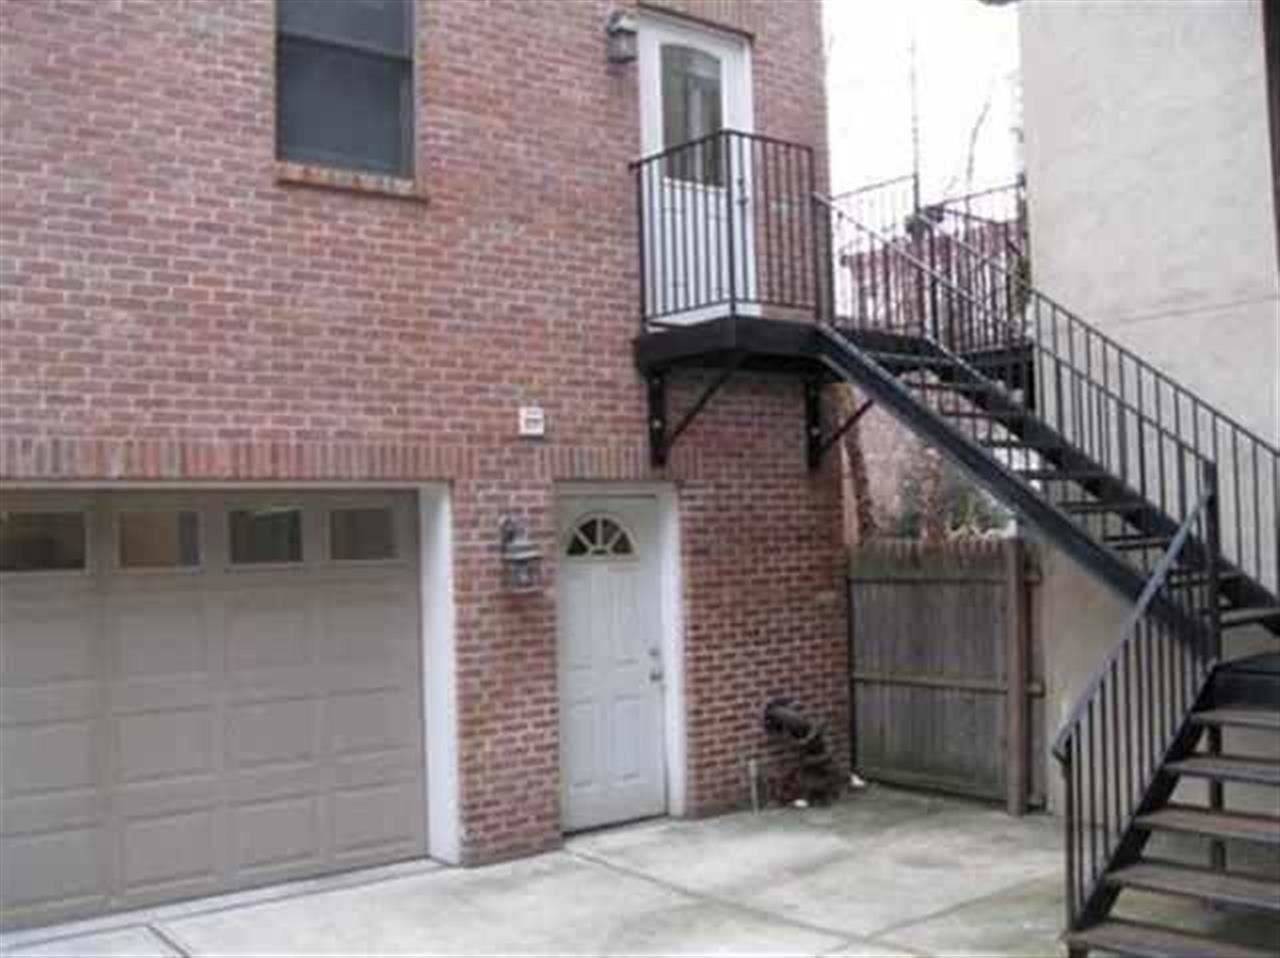 2br/1ba Carriage house with a roof deck and garage parking w/room for 2 smaller cars